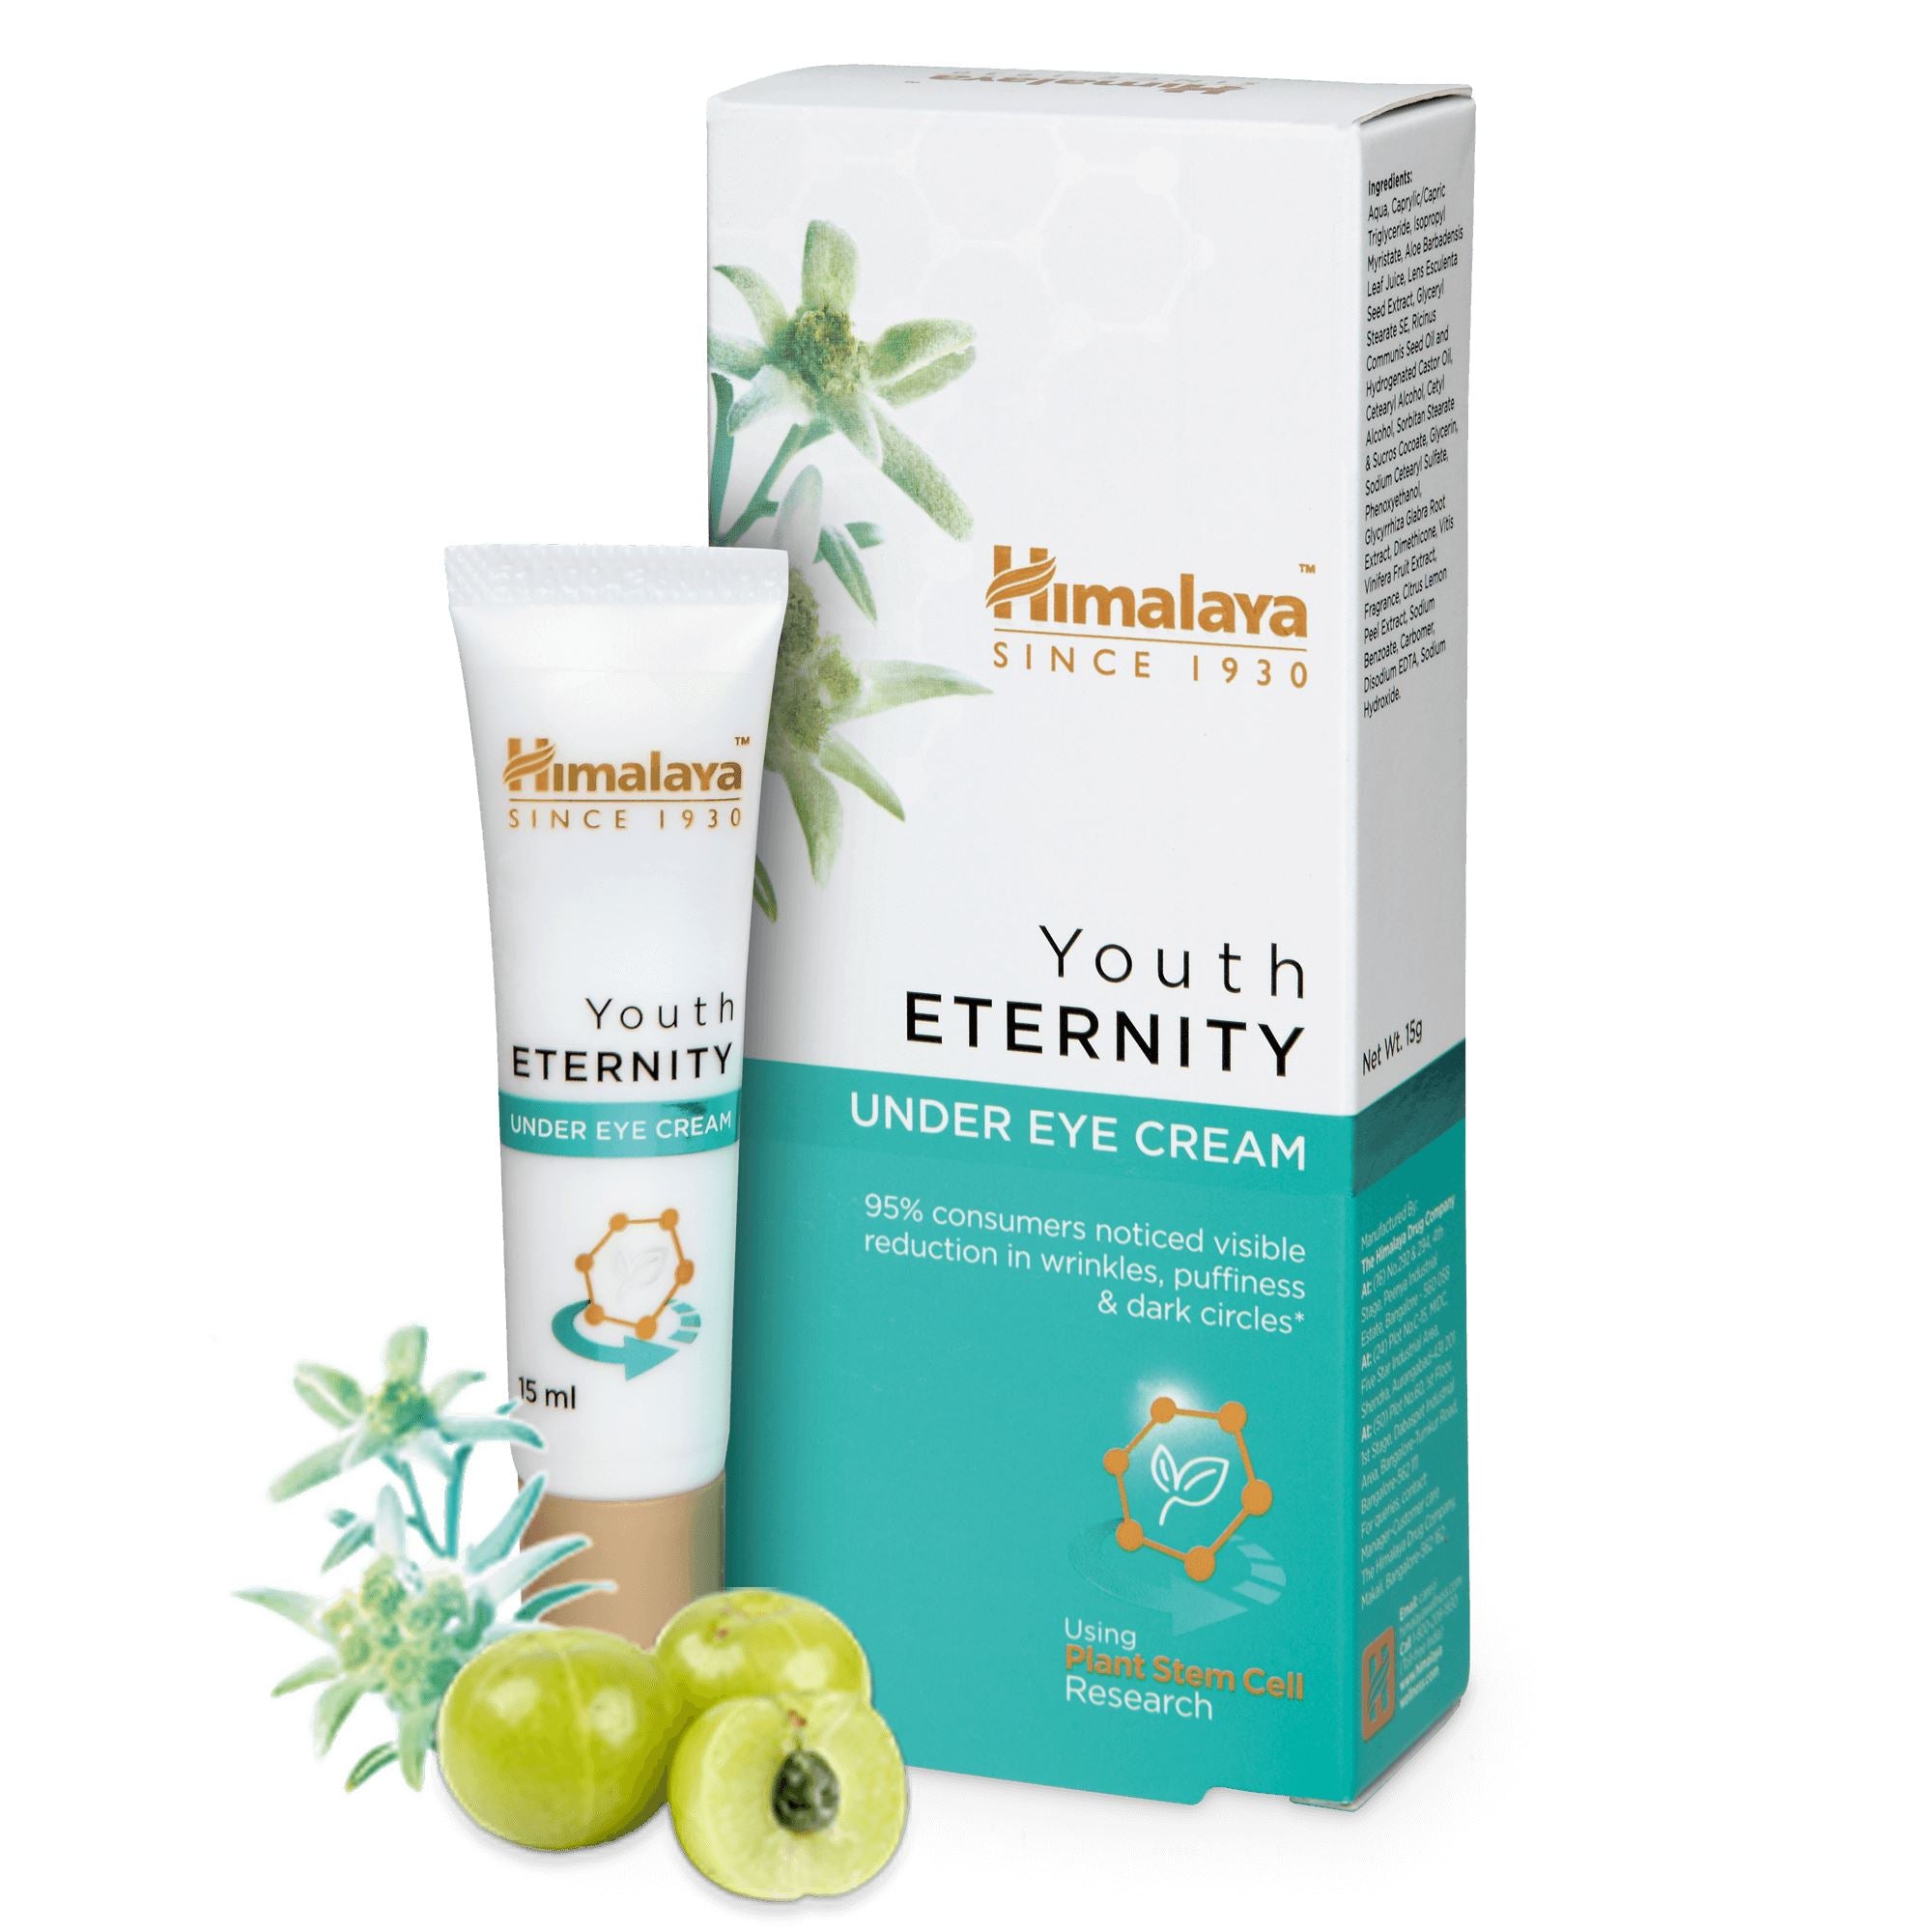 Himalaya Youth Eternity Under Eye Cream - Visible reduction in wrinkles, puffiness and dark circles